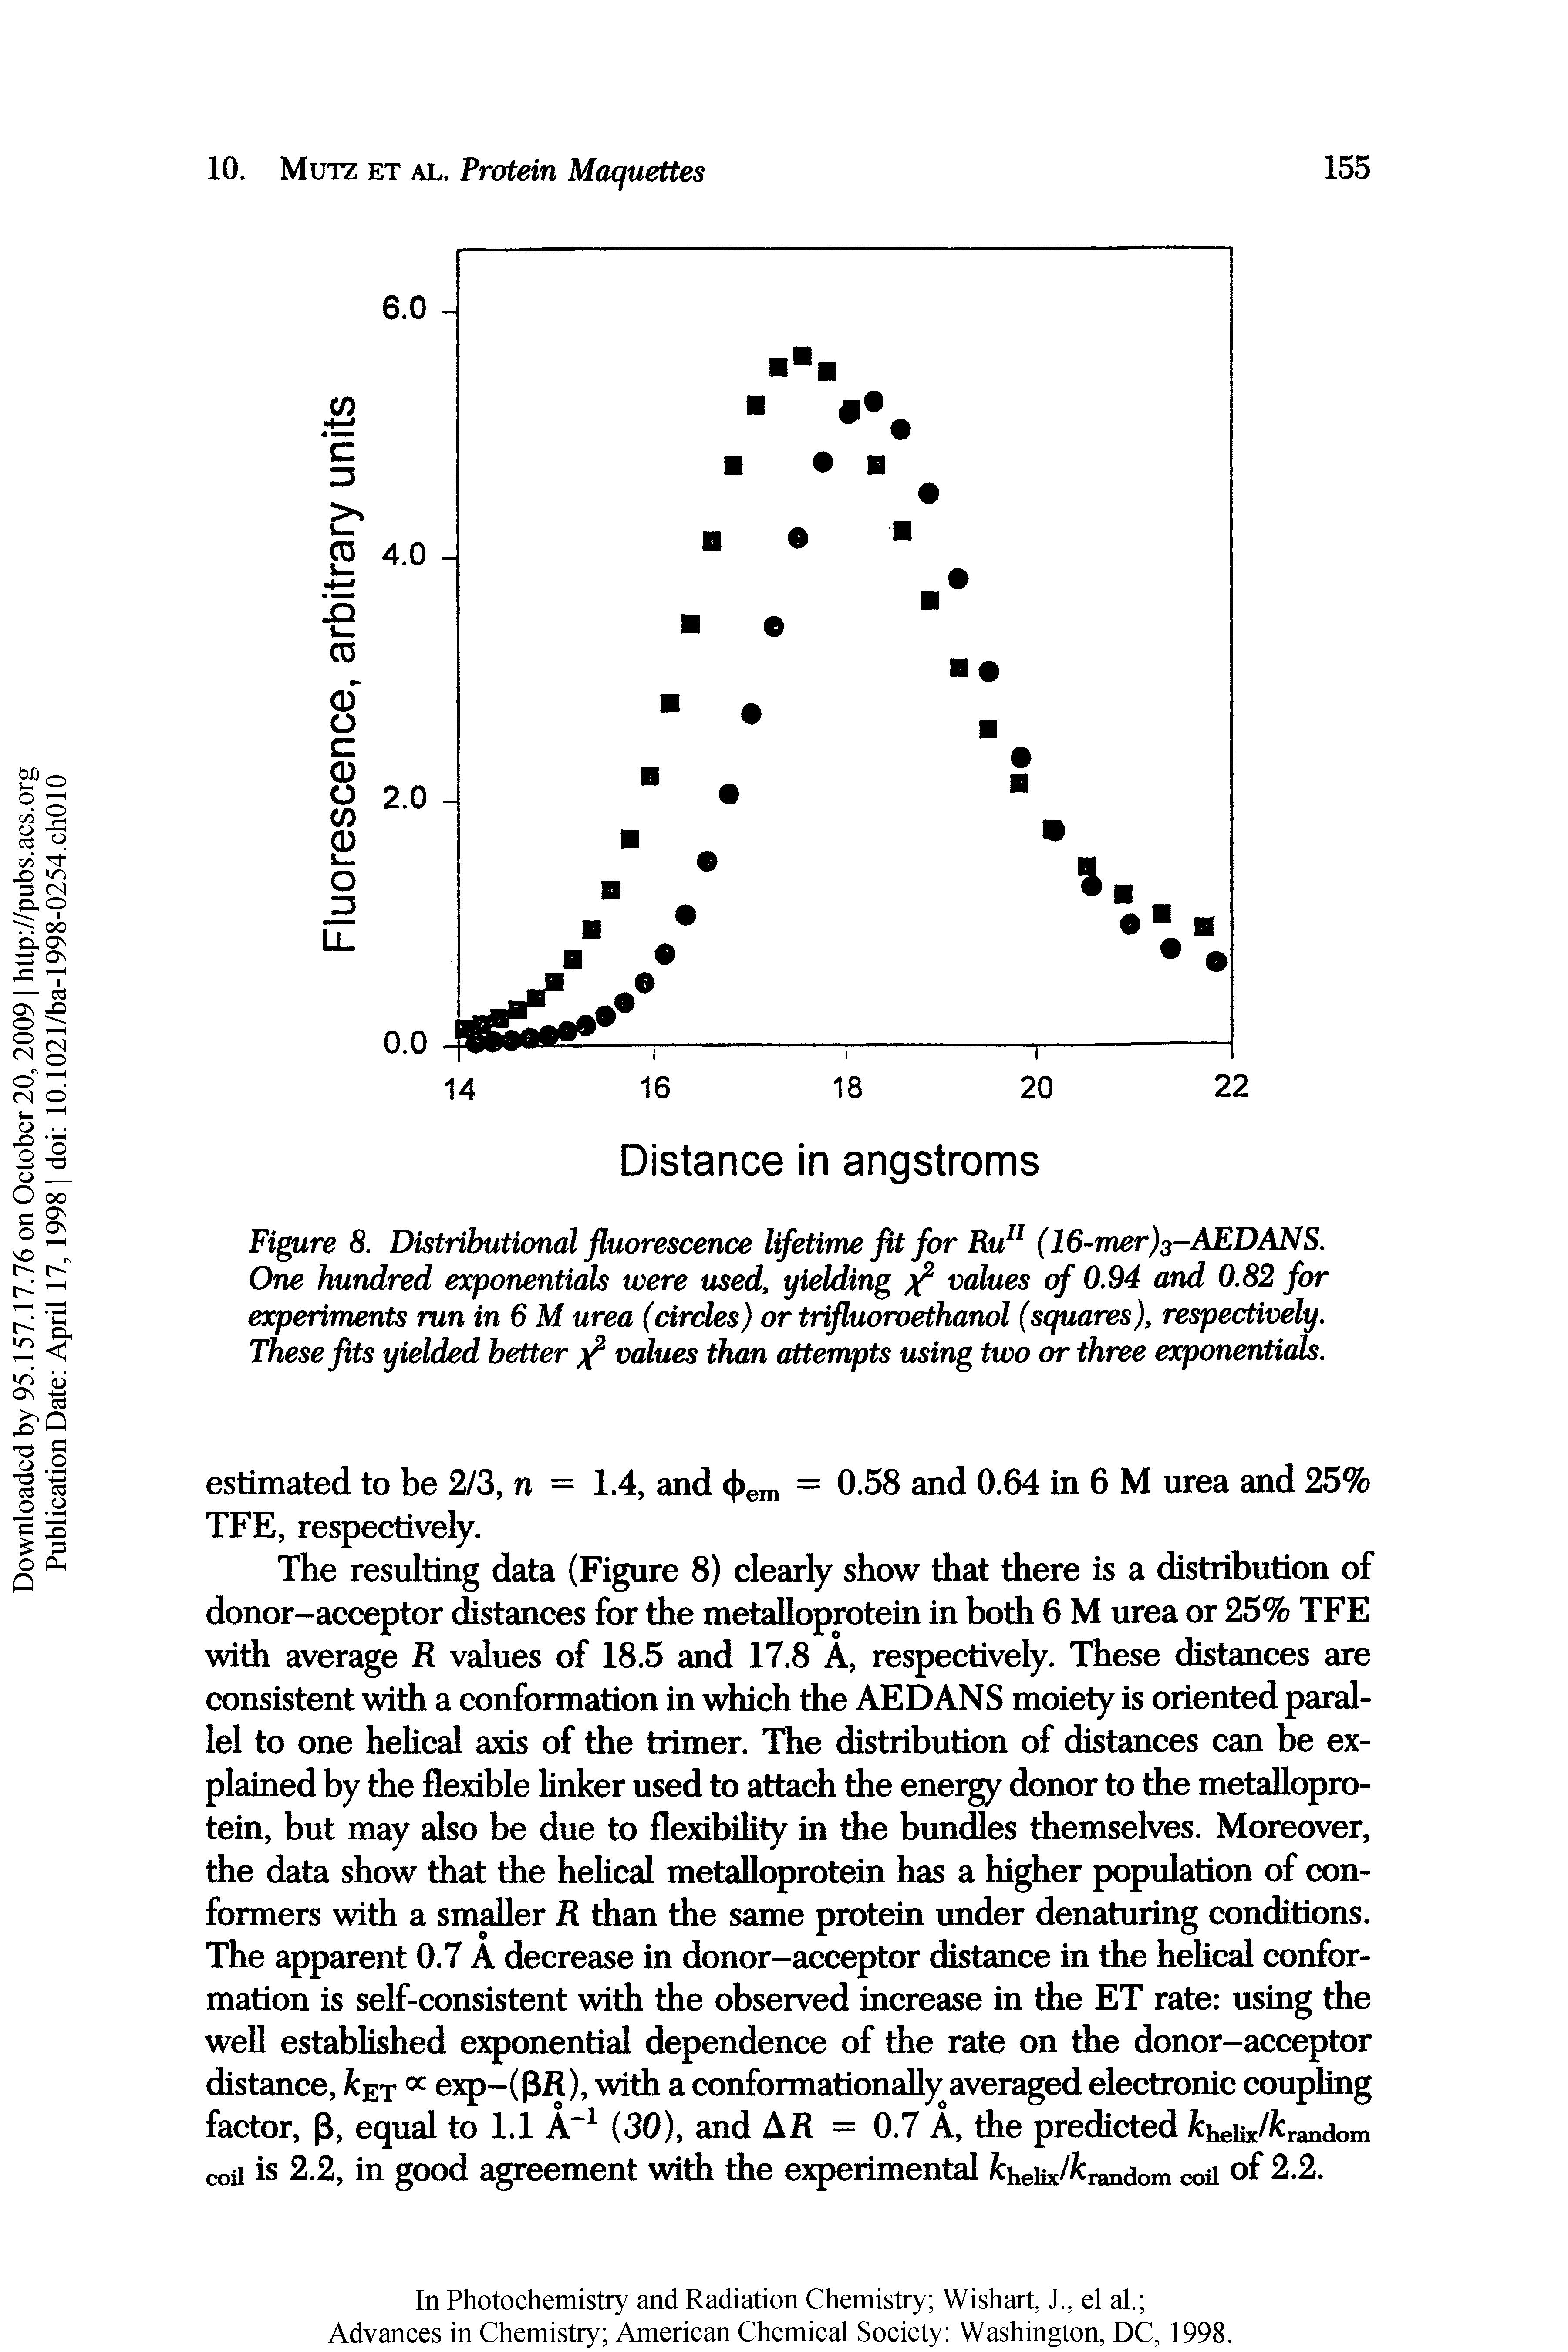 Figure 8. Distributional fluorescence lifetime fit for Ru (16-mer)3-AEDANS. One hundred exponentials were used, yielding x values of 0.94 and 0.82 for experiments run in 6 M urea (circles) or trifluoroethanol (squares), respectively. These fits yielded better values than attempts using two or three exponentials.